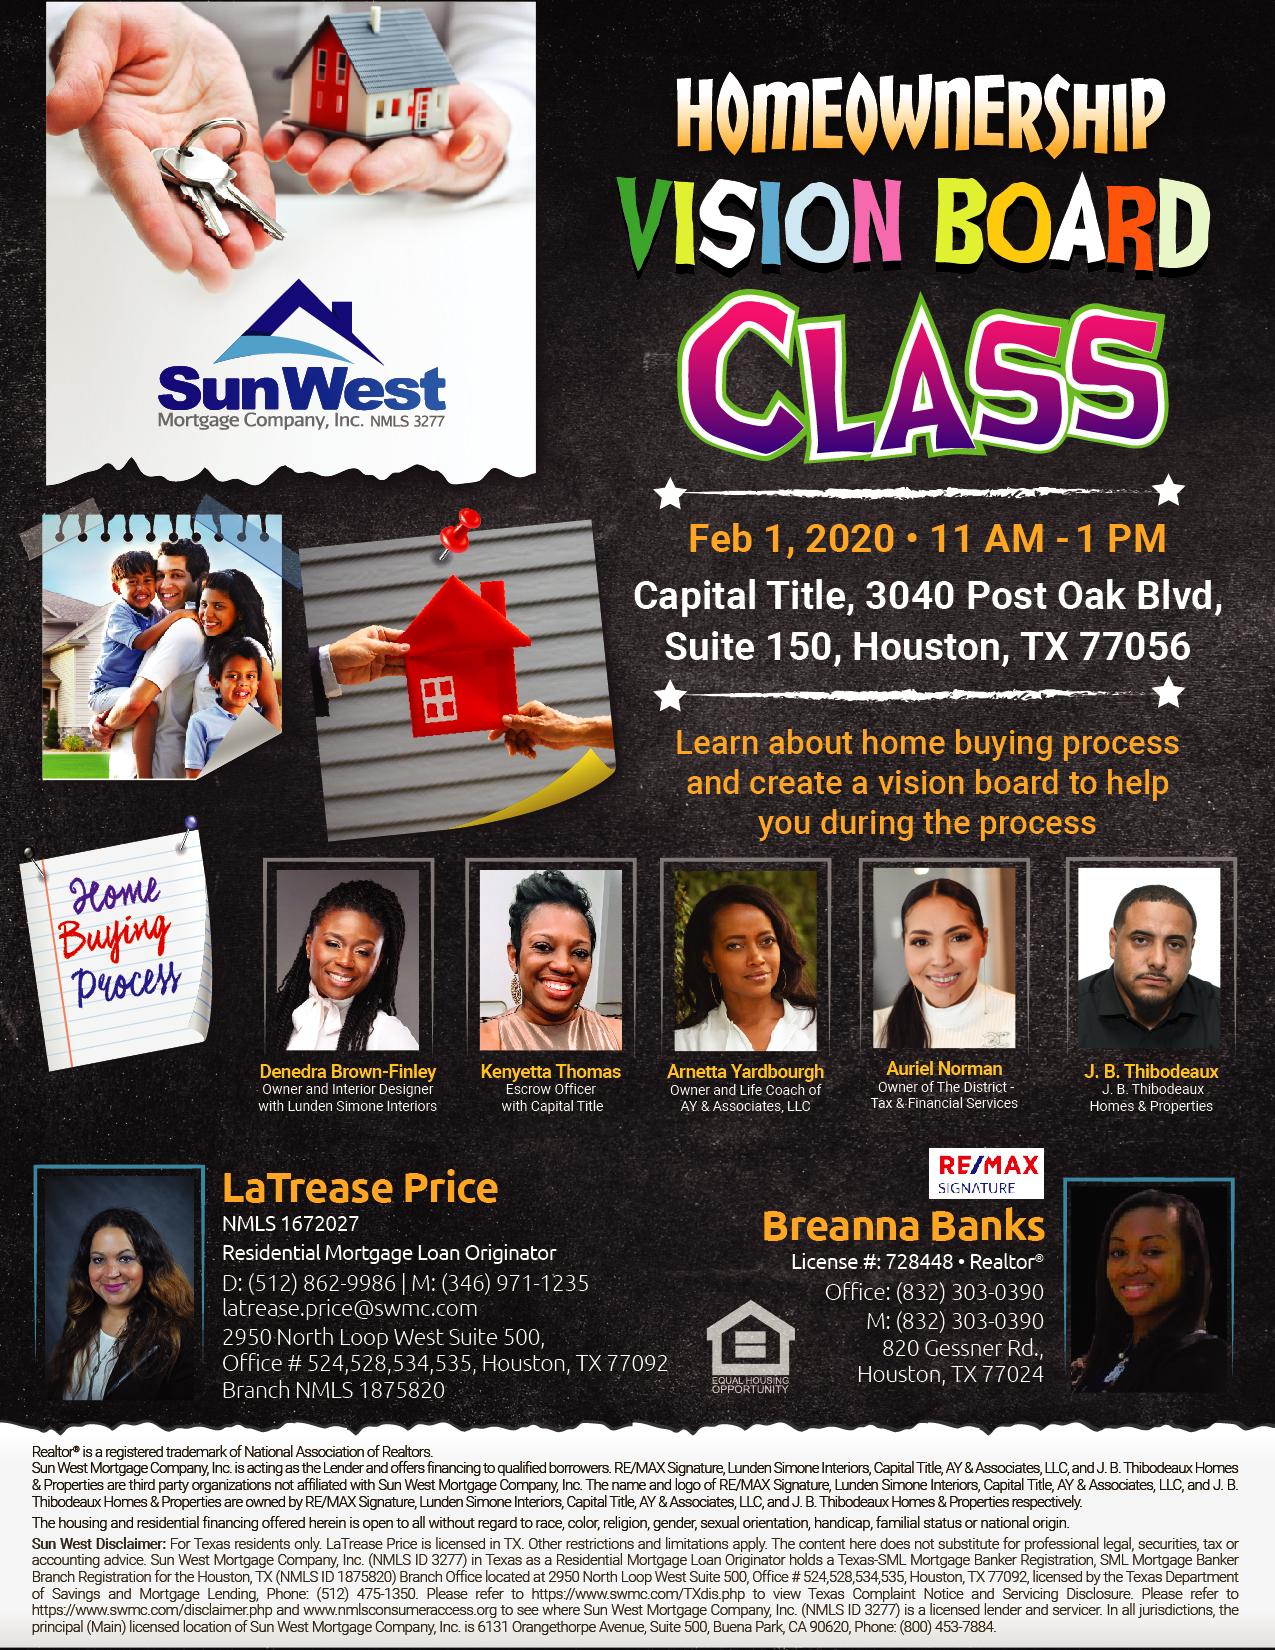 Home Ownership Vision Board Class